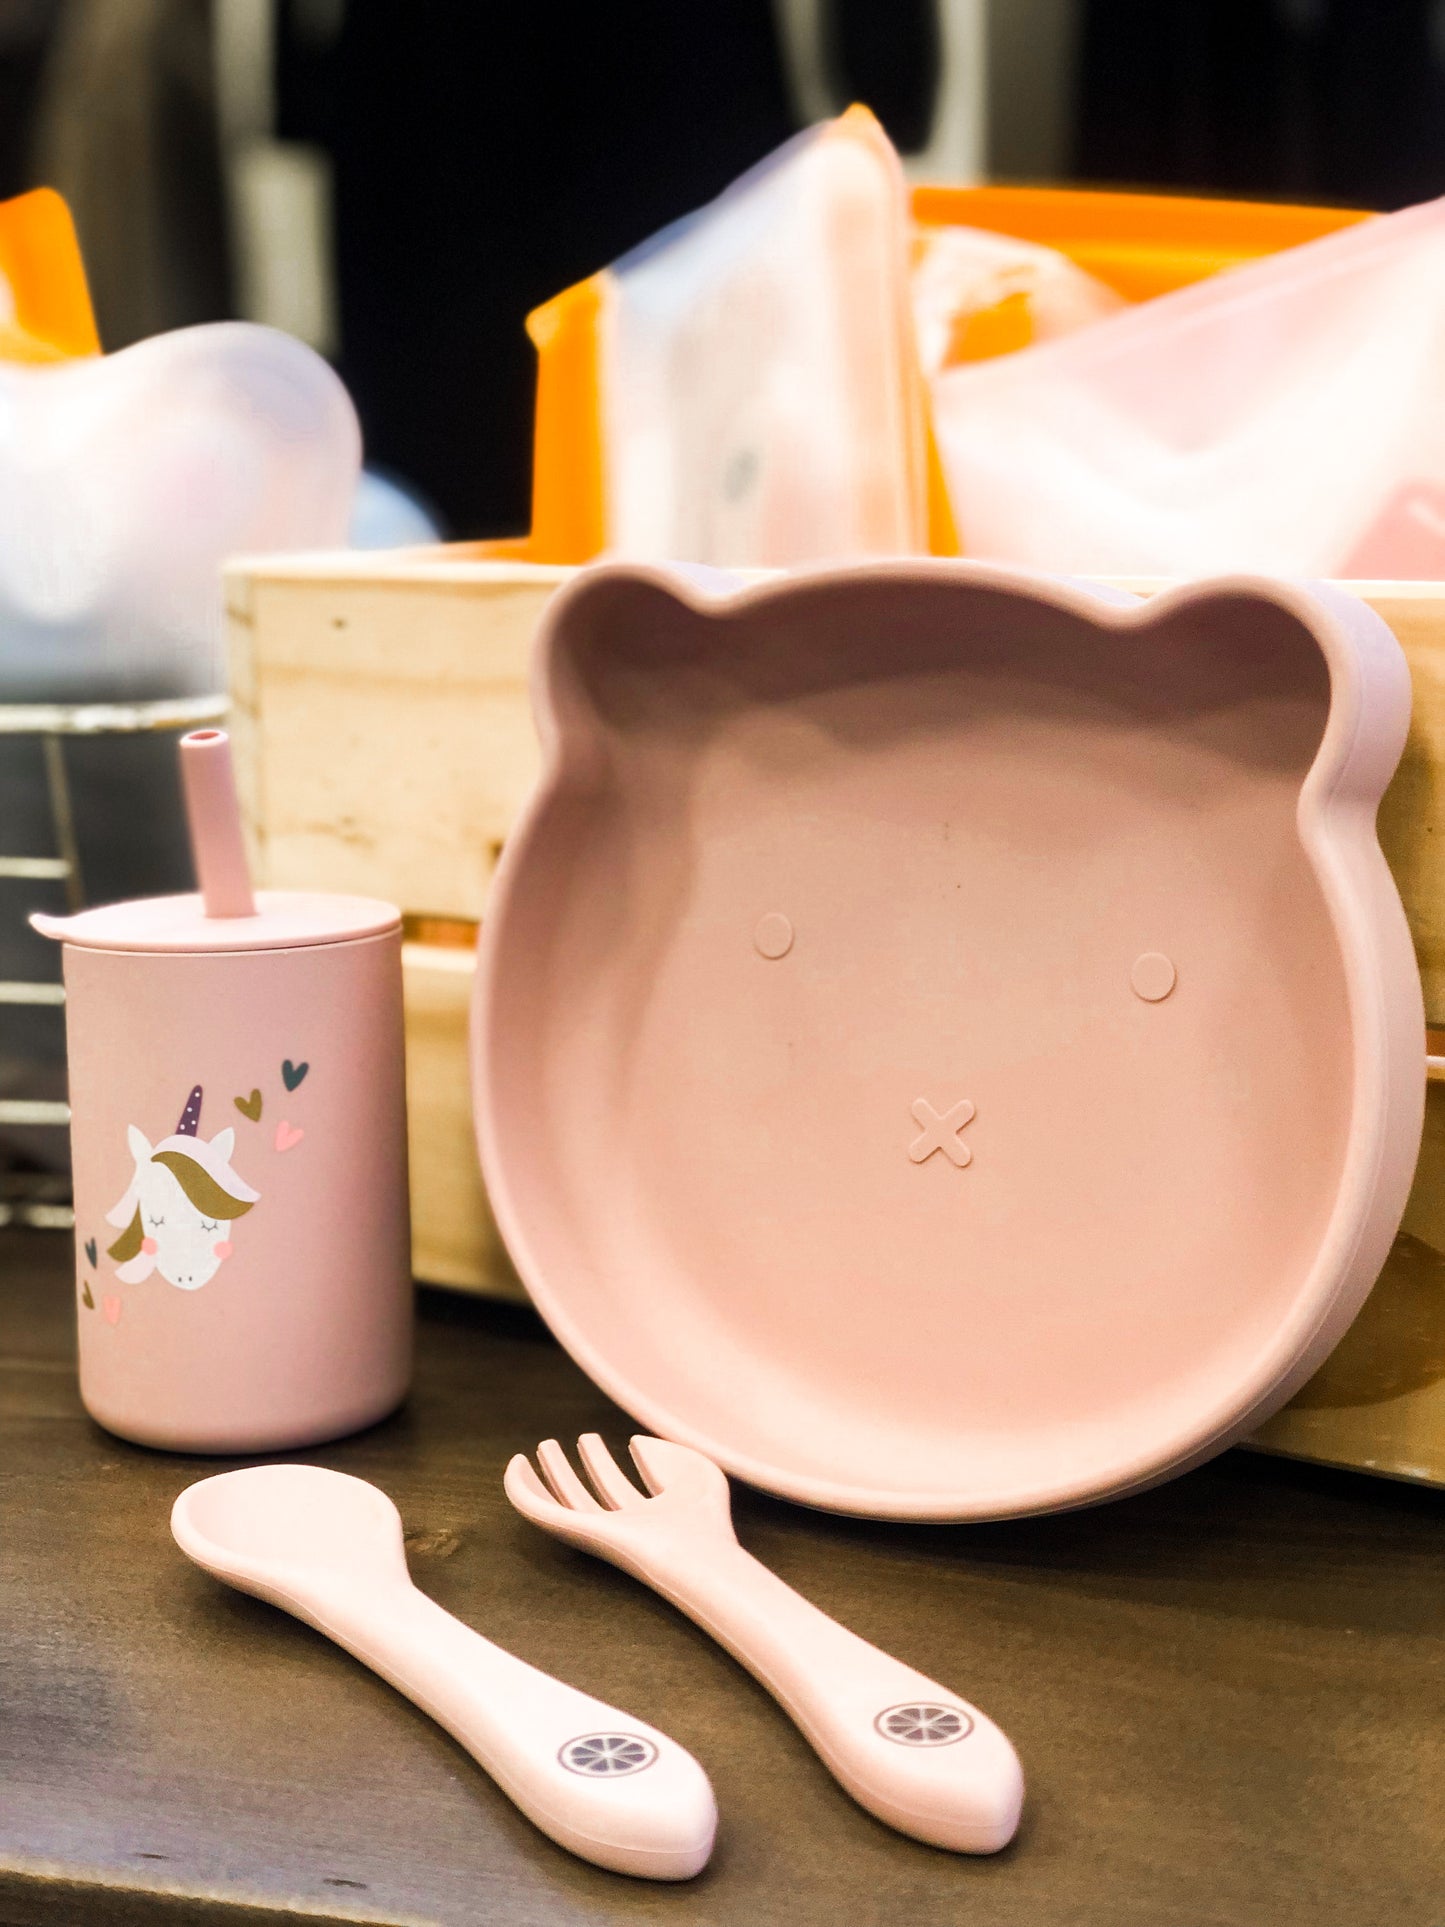 Silicone Bear Plate in Pink Mauve